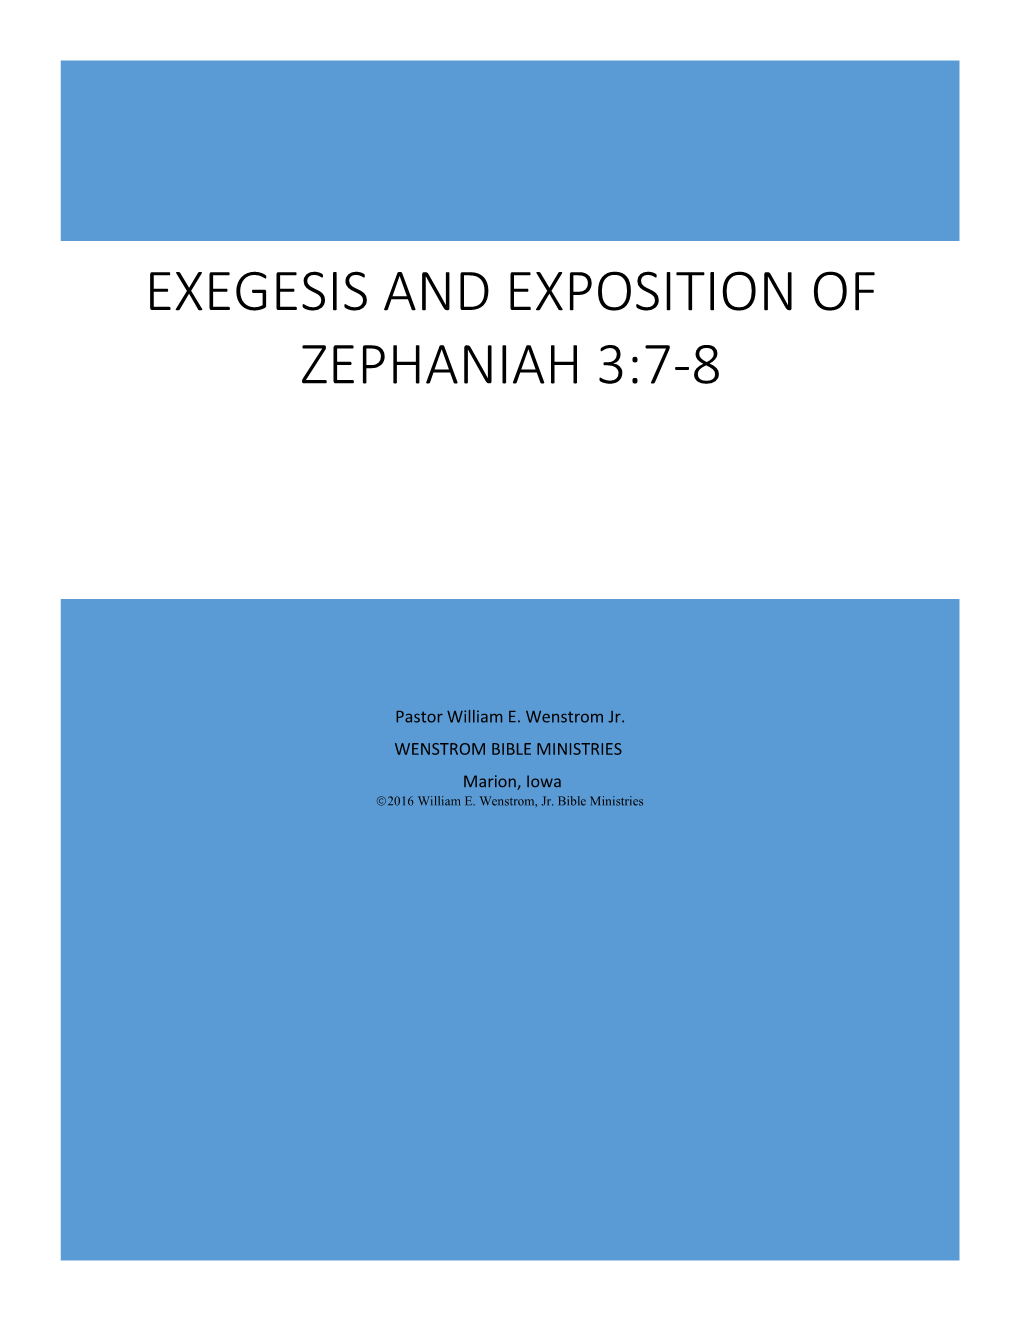 Exegesis and Exposition of Zephaniah 3:7-8